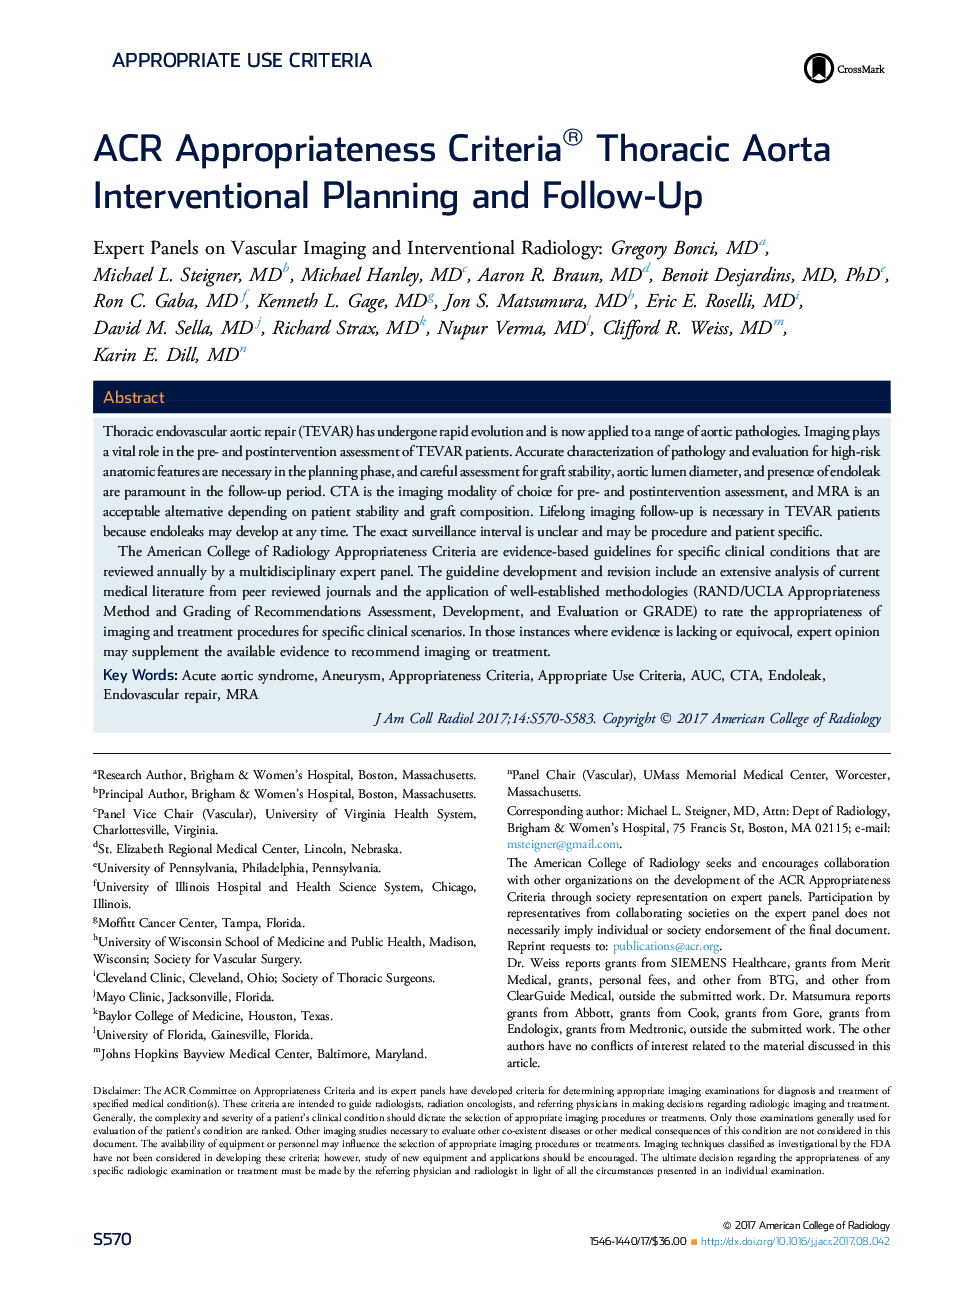 ACR Appropriateness Criteria® Thoracic Aorta Interventional Planning and Follow-Up